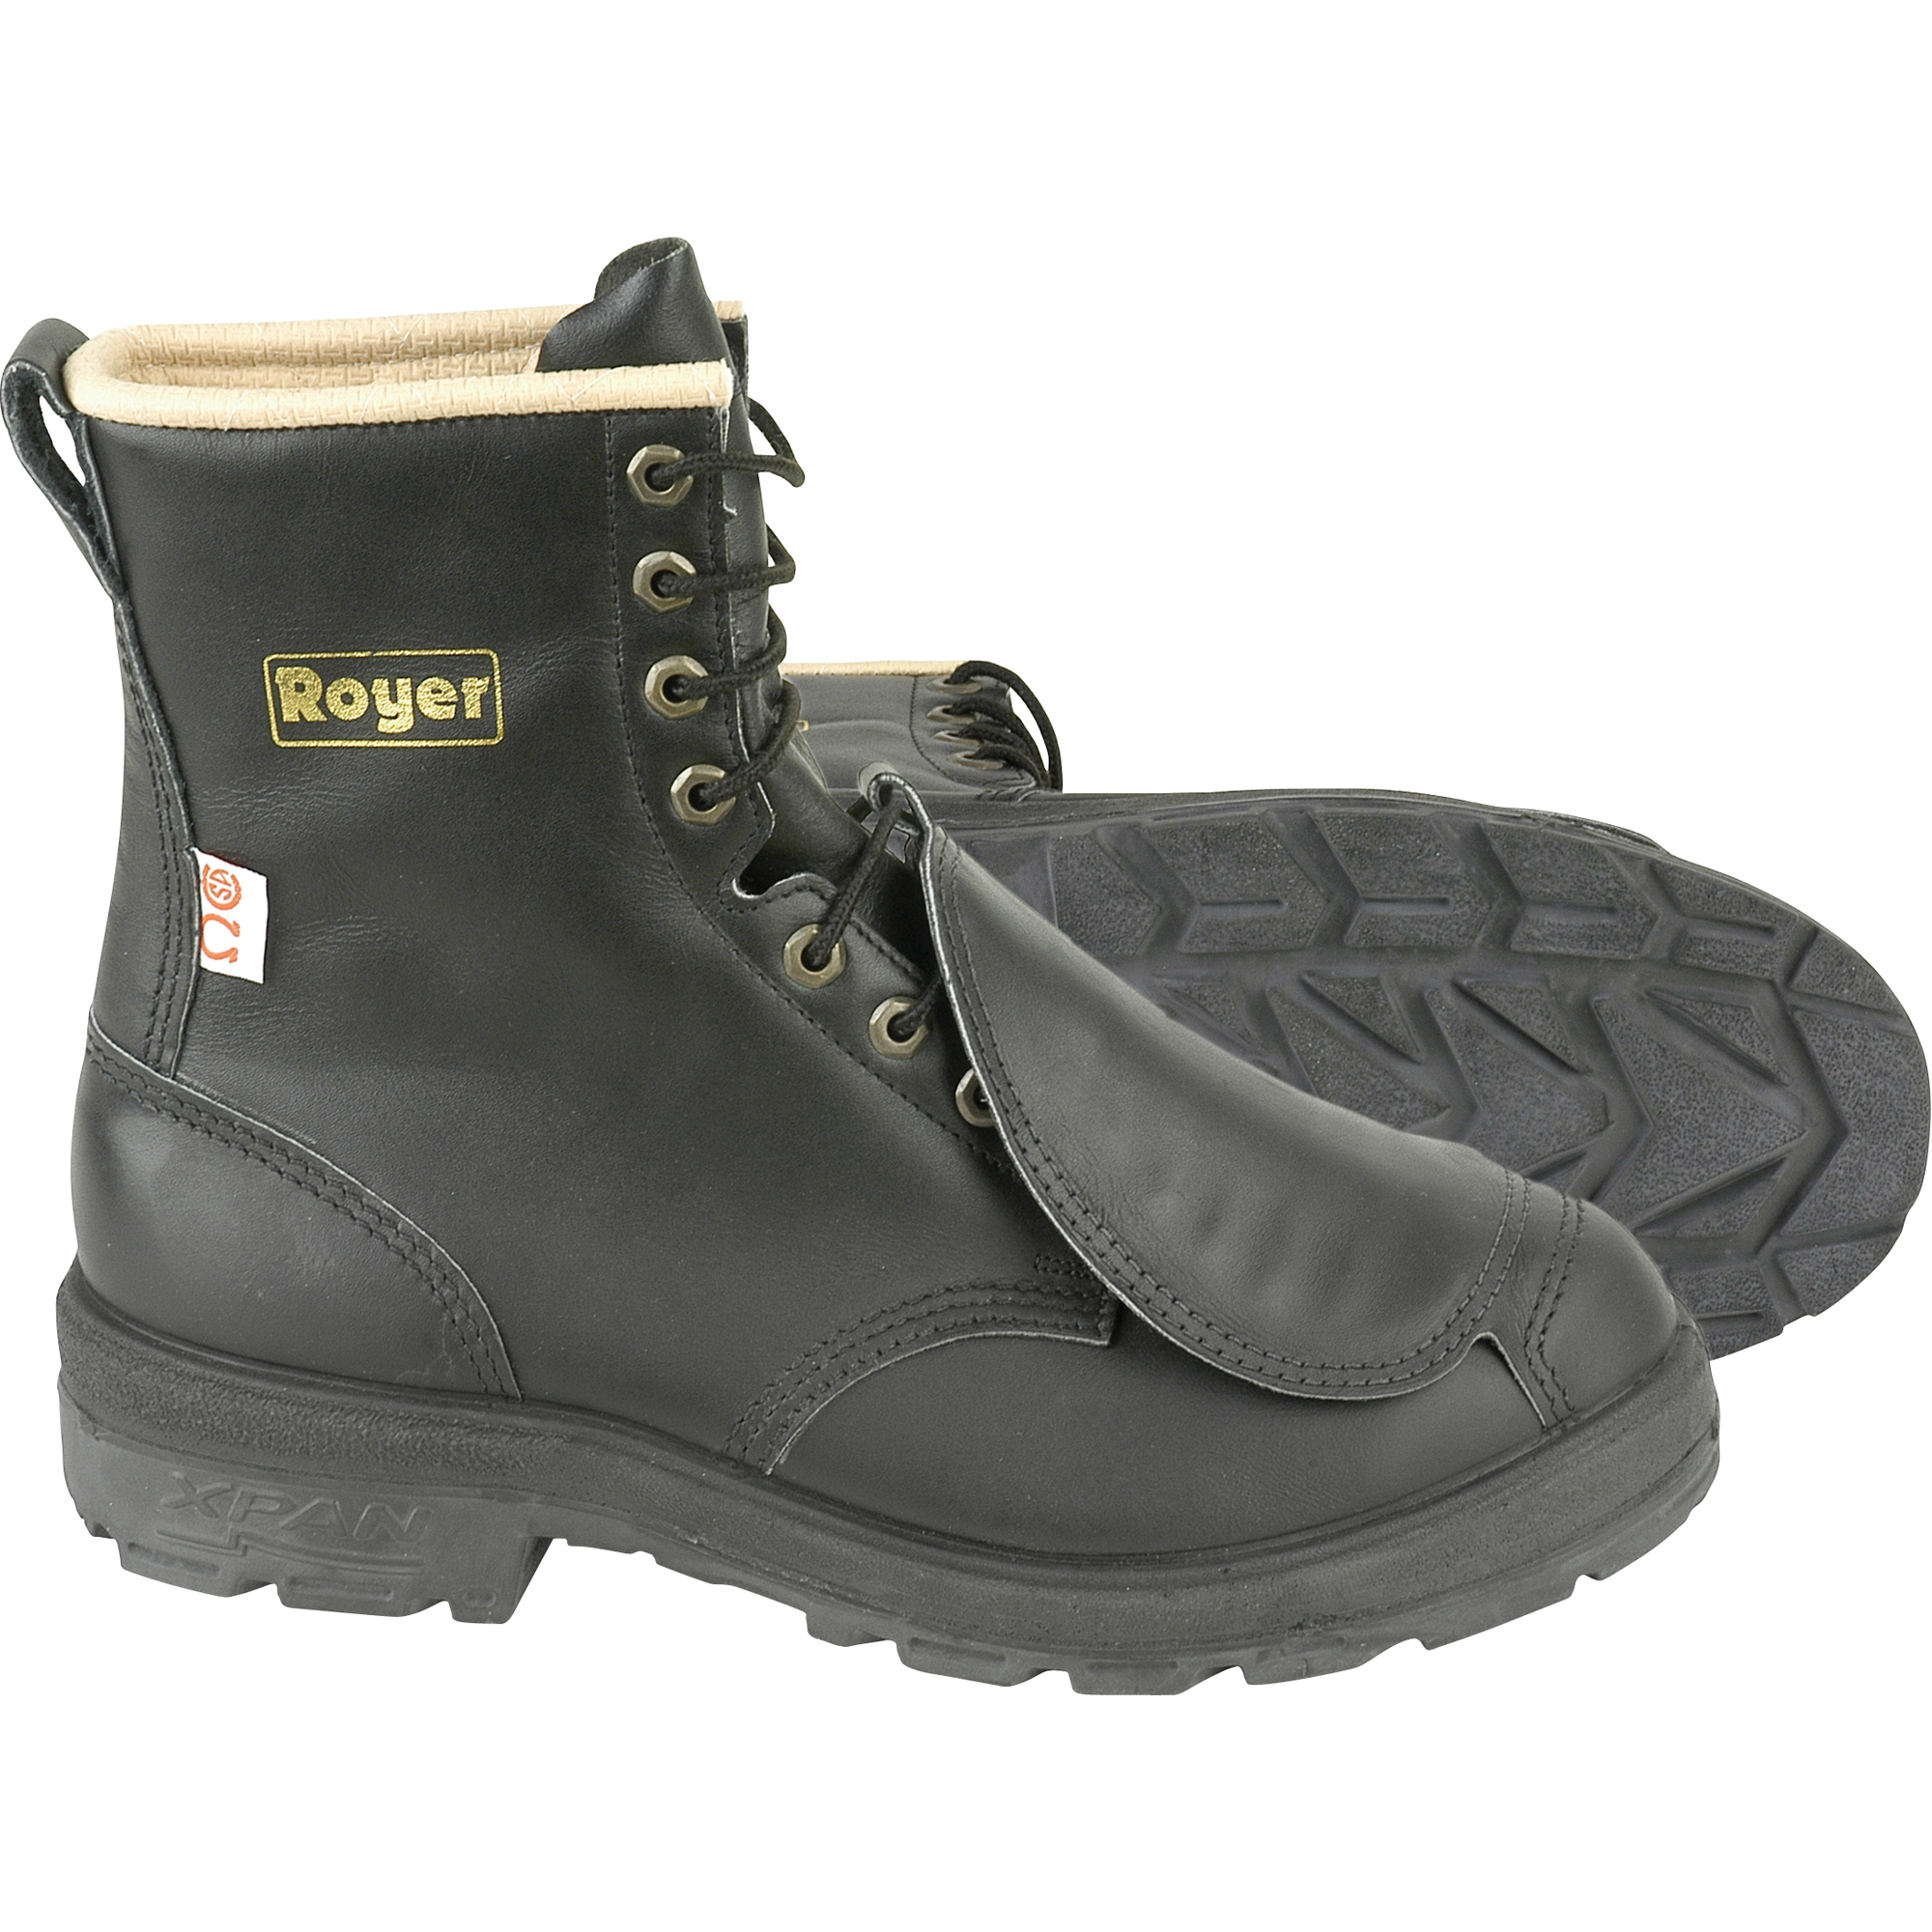 royer work boots for sale